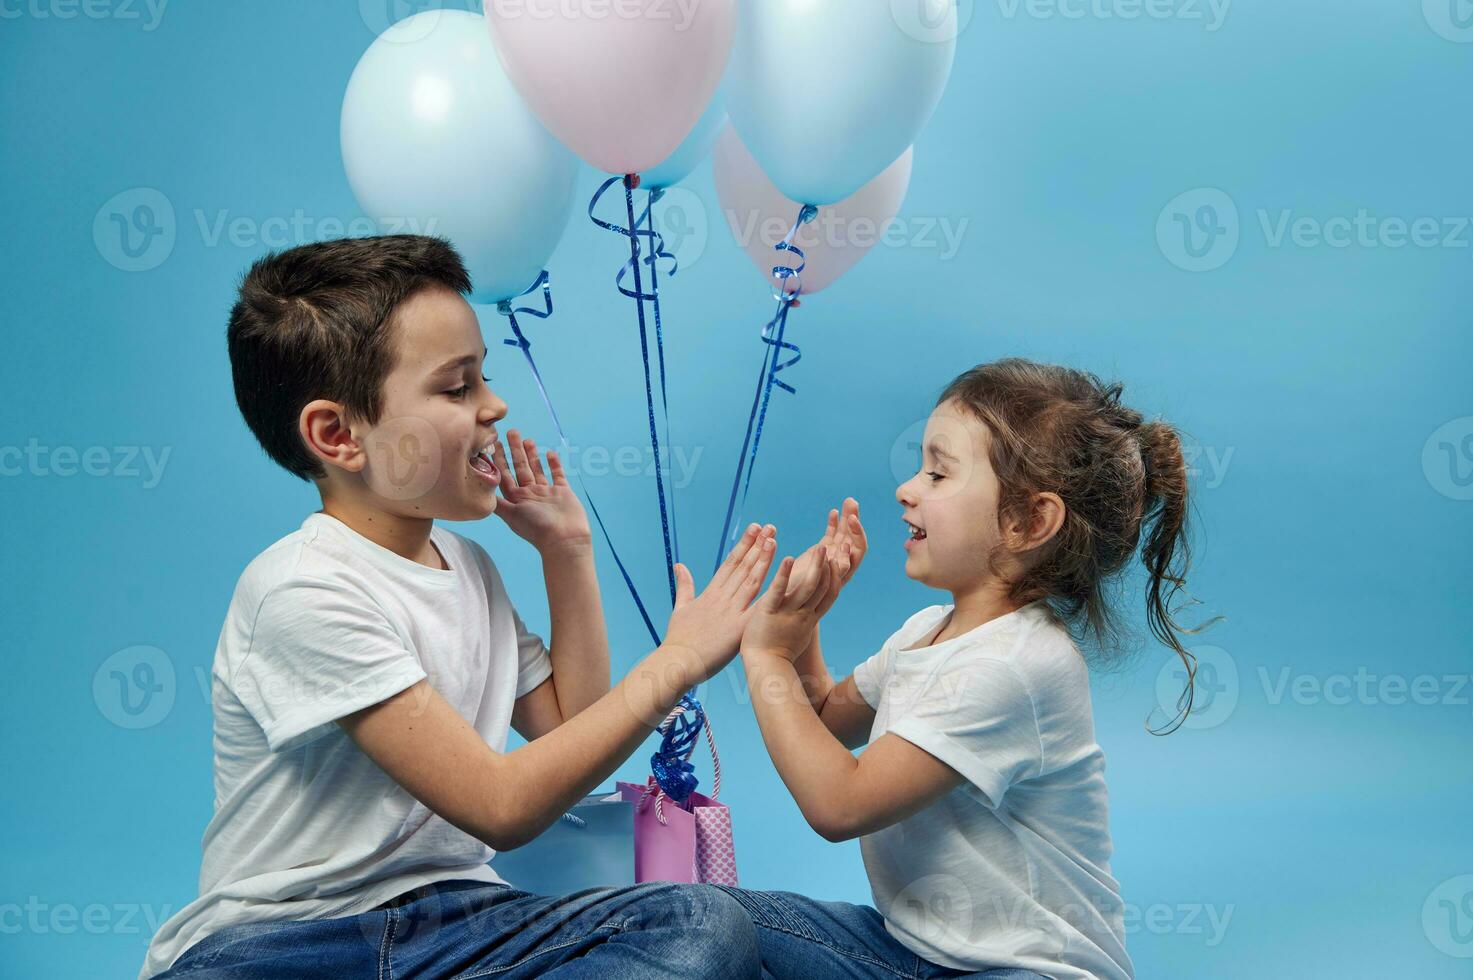 Boy and girl clapping hands, enjoying time together. Happy family relationships. photo